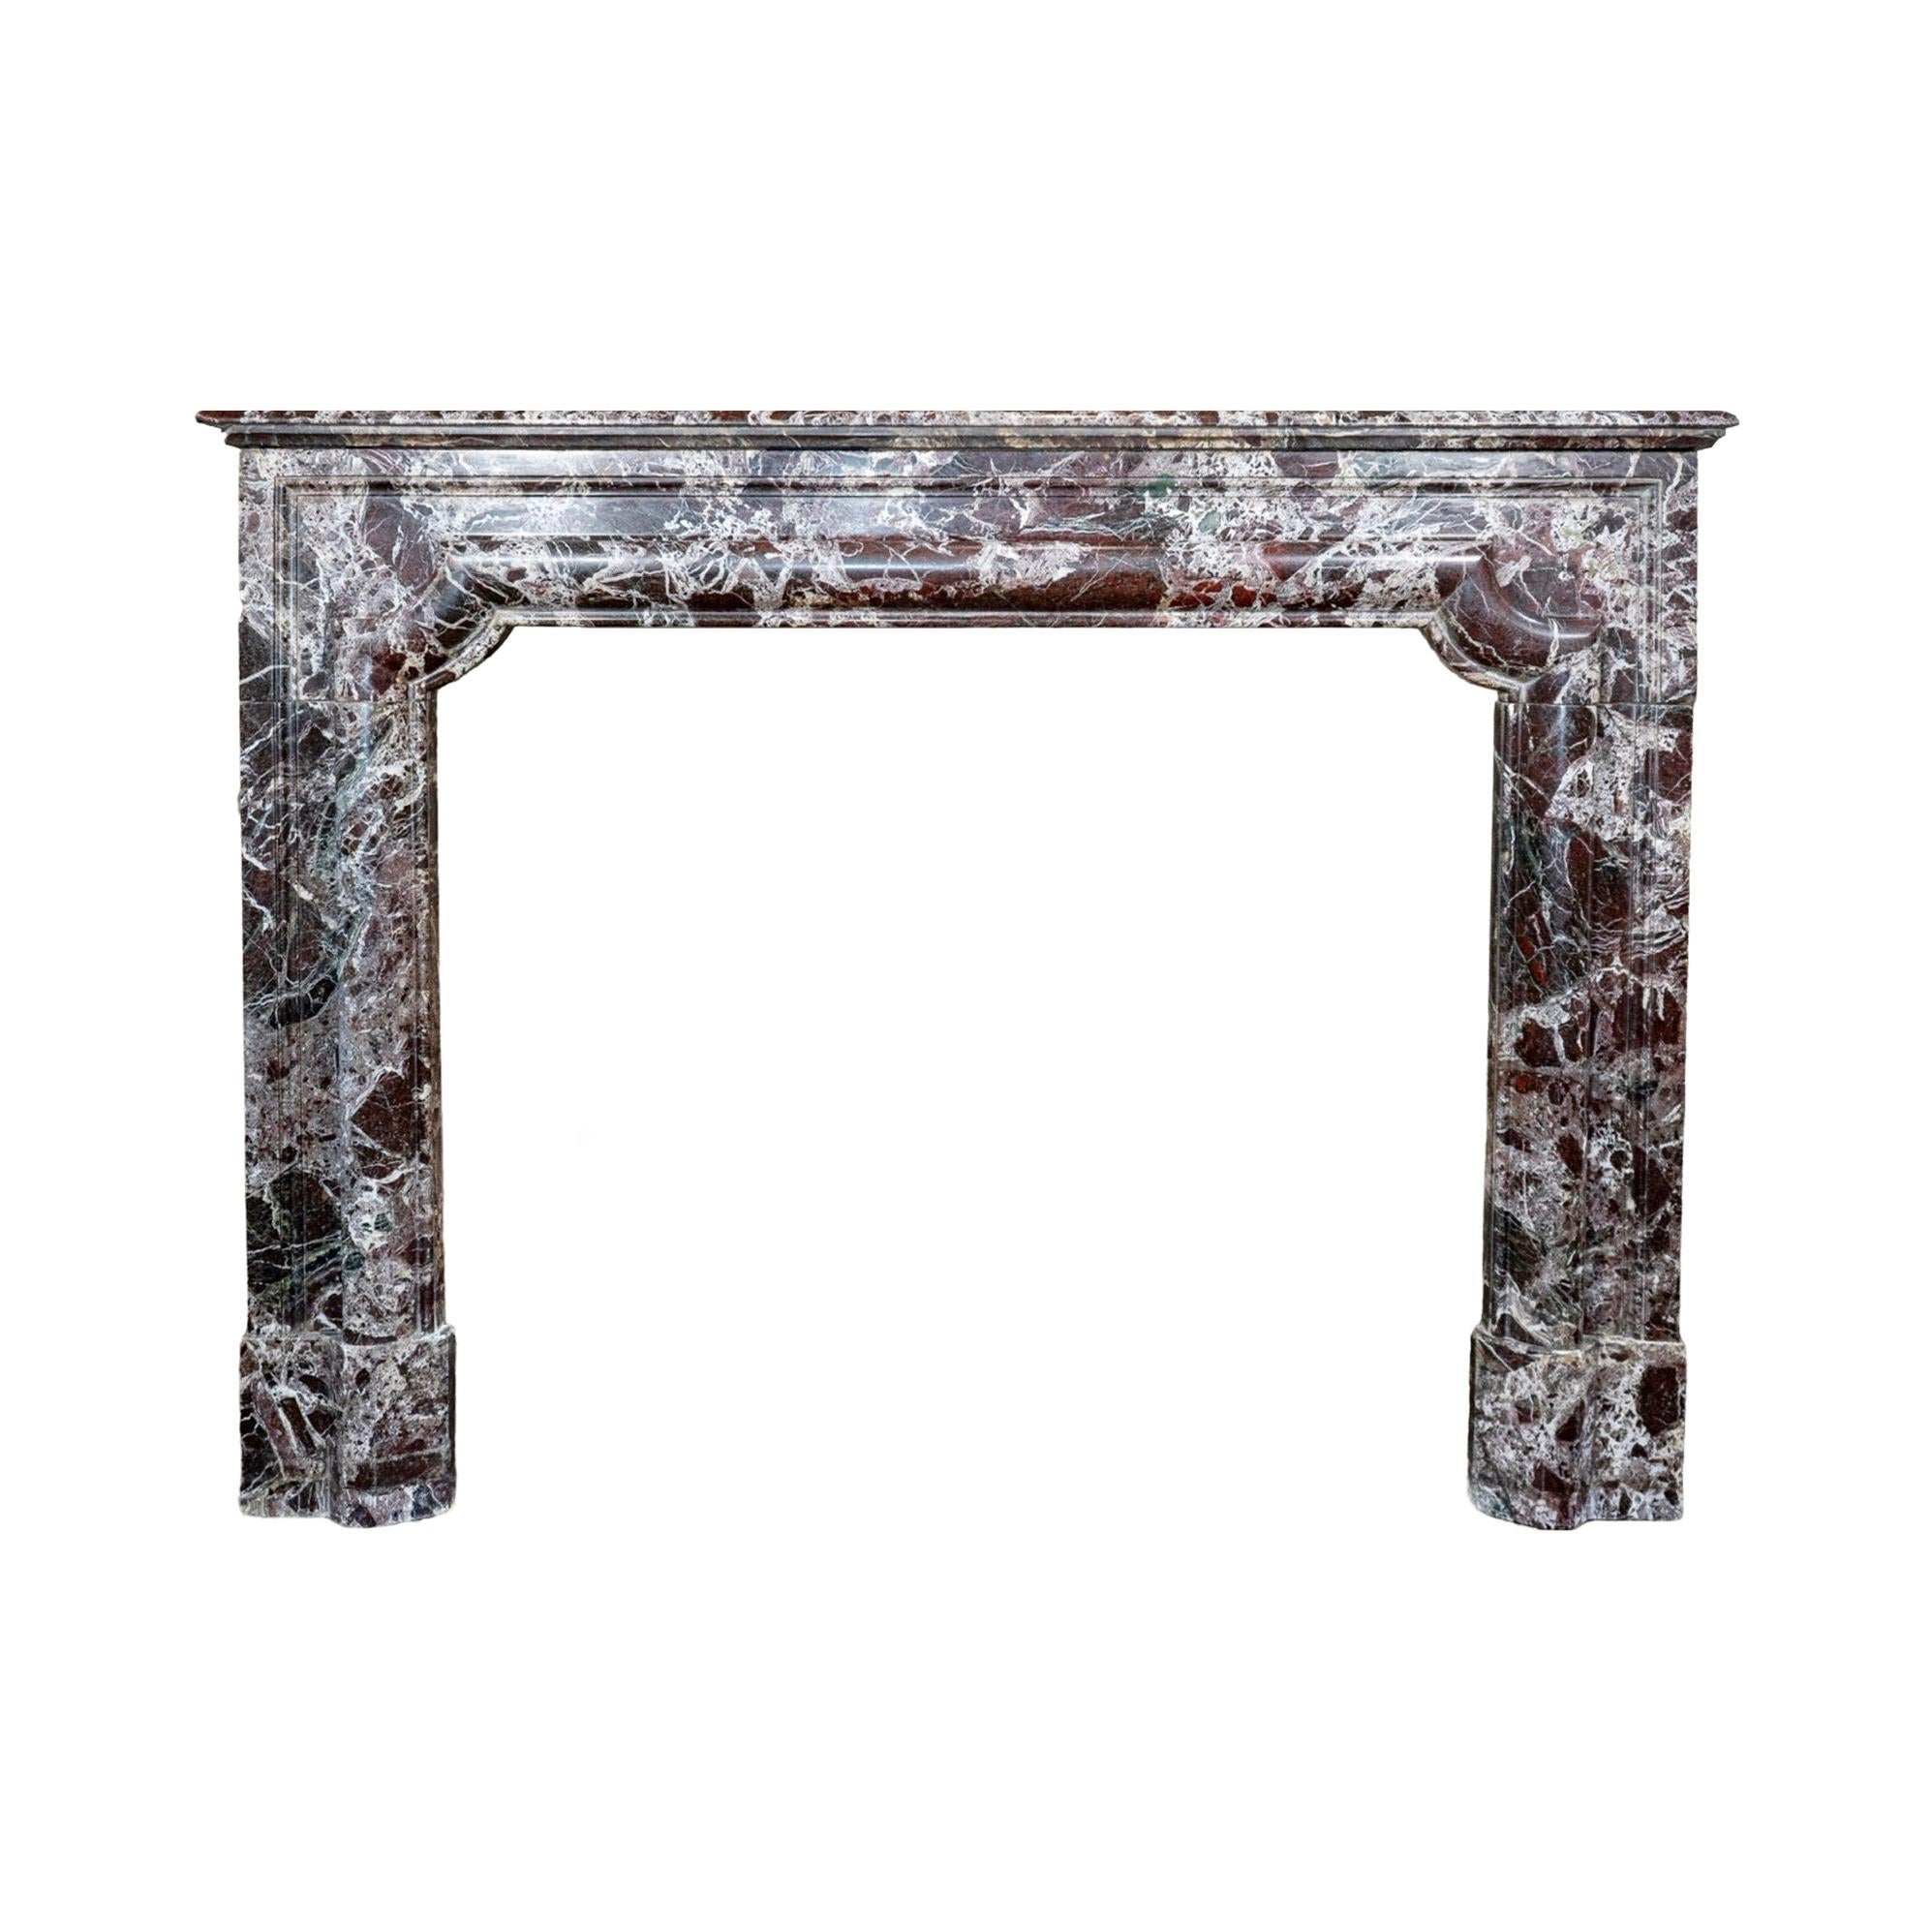 This French Violet Breccia Marble Mantel is an antique piece from the 1880s, crafted in the style of Louis XIII. Made out of stunning violet breccia marble, this mantel features elegant bolection design carvings. Features two bronze air vents for